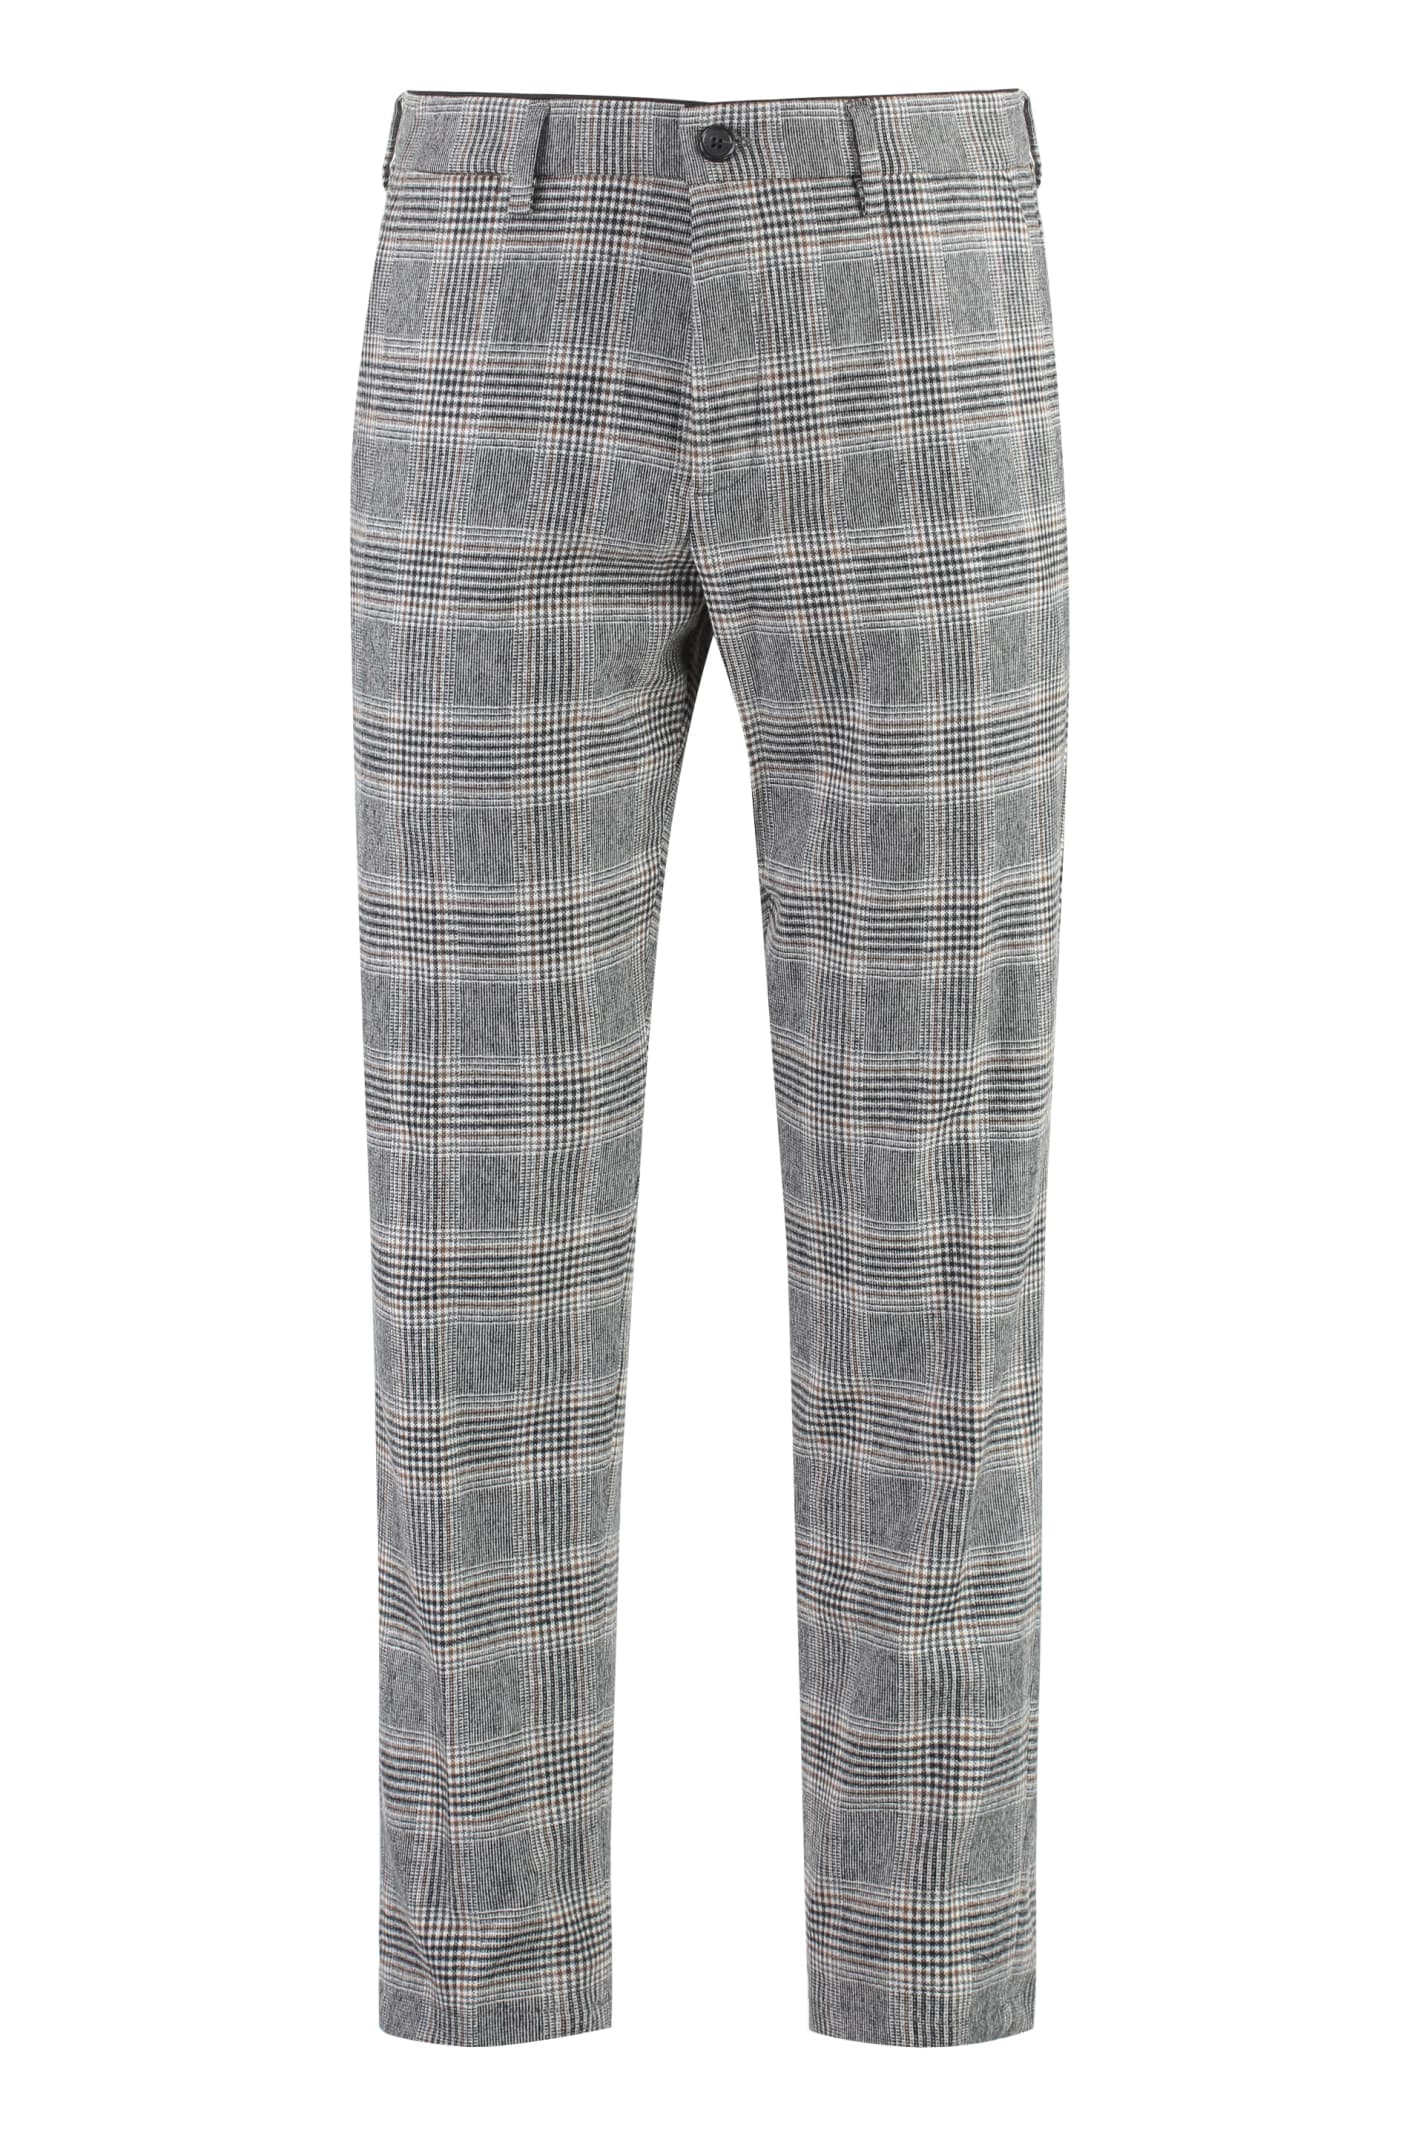 Shop Department Five Setter Chino Pants In Wool Blend In Grey